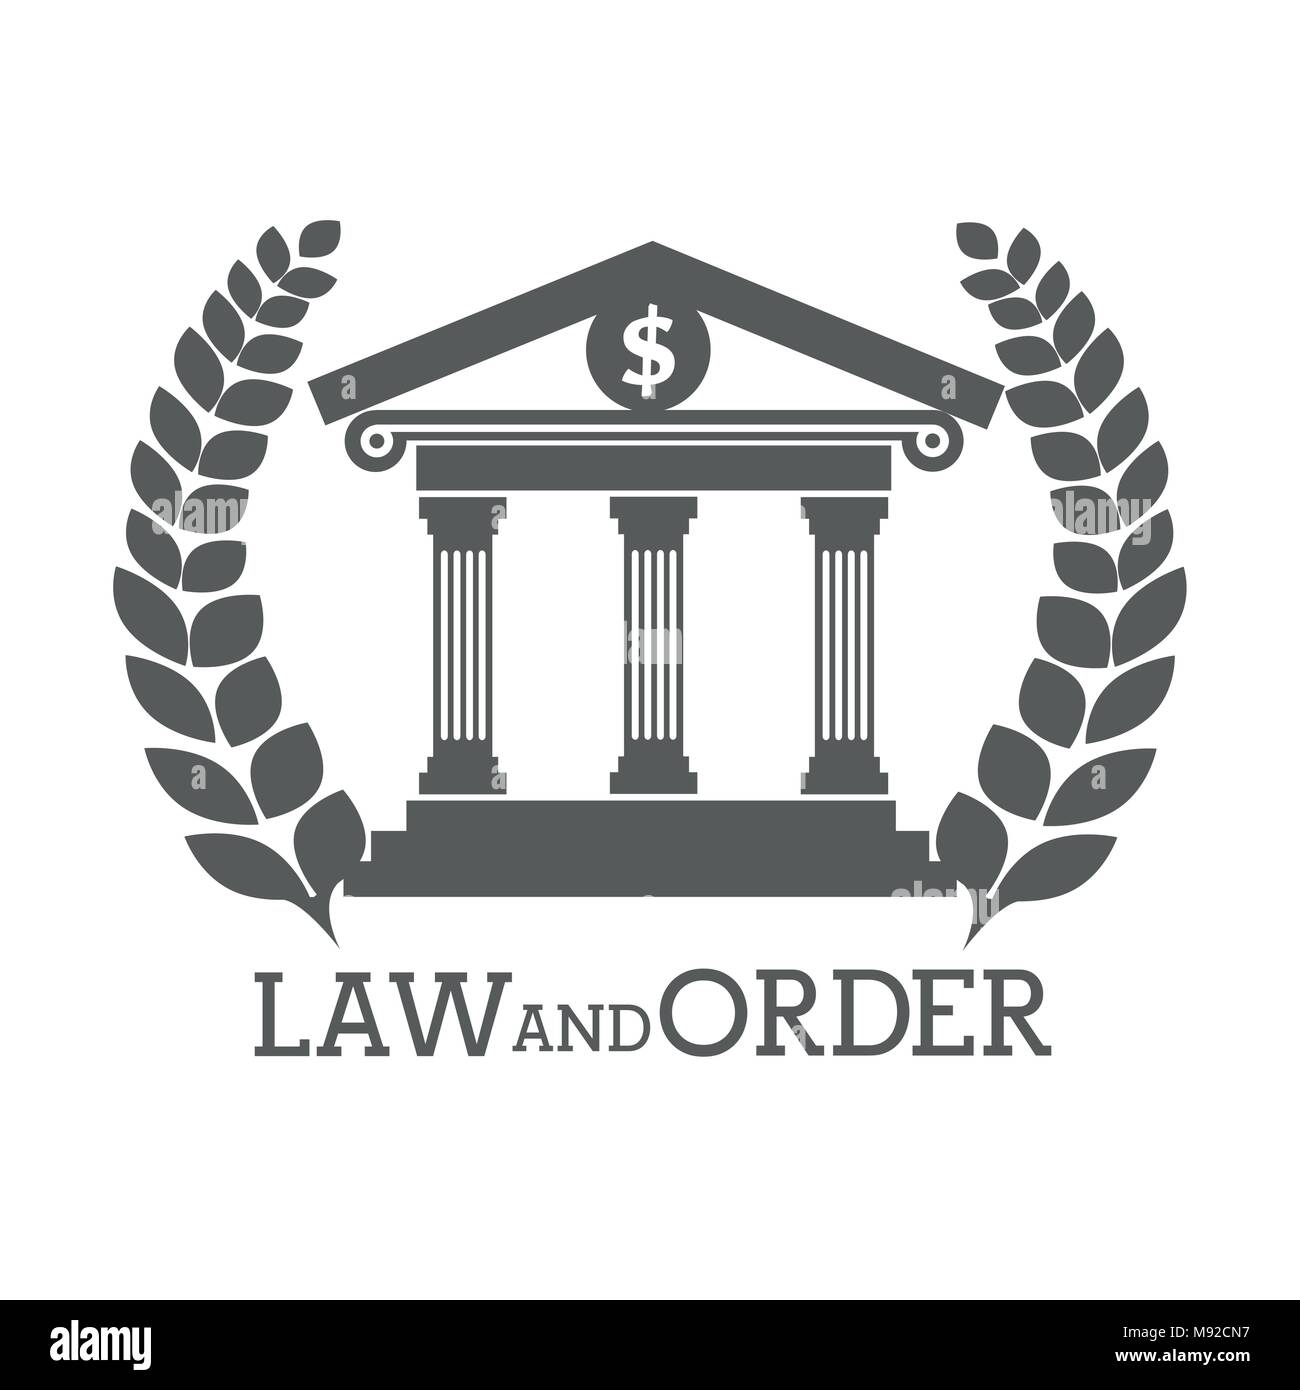 law and order design, vector illustration eps10 graphic Stock Vector